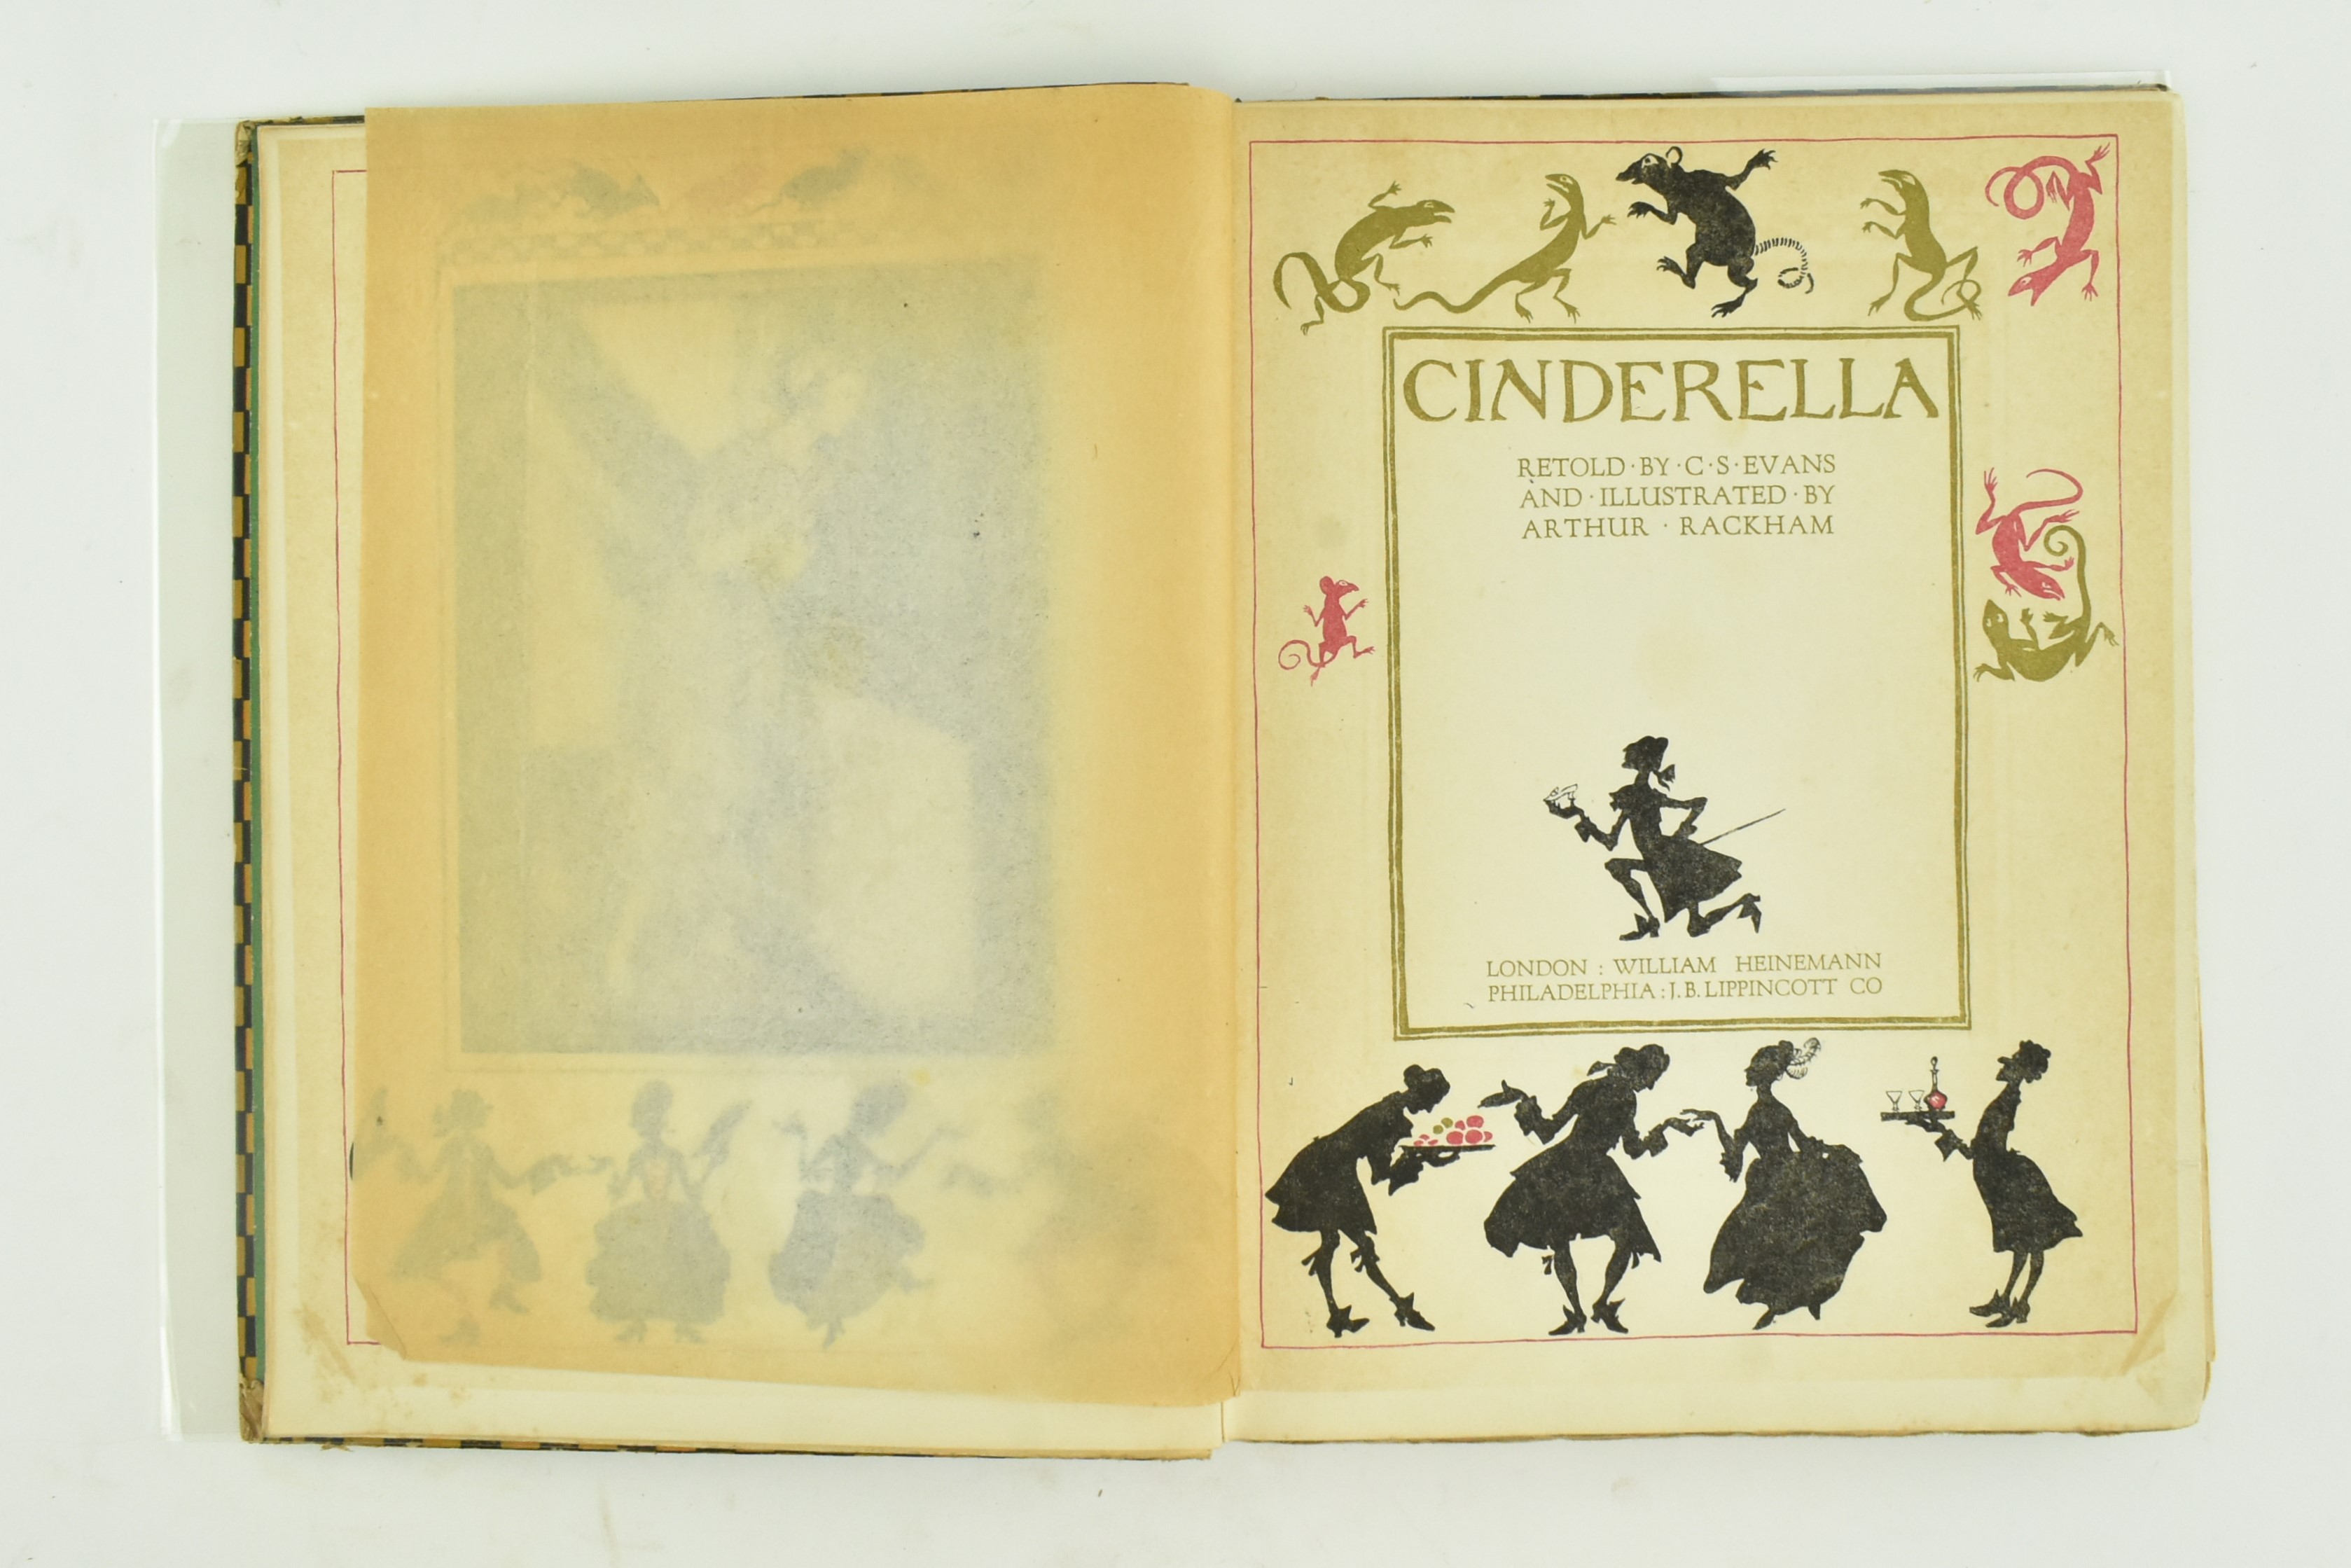 EDWARDIAN CHILDREN'S ILLUSTRATED BOOK. COLLECTION OF 5 WORKS - Image 6 of 10